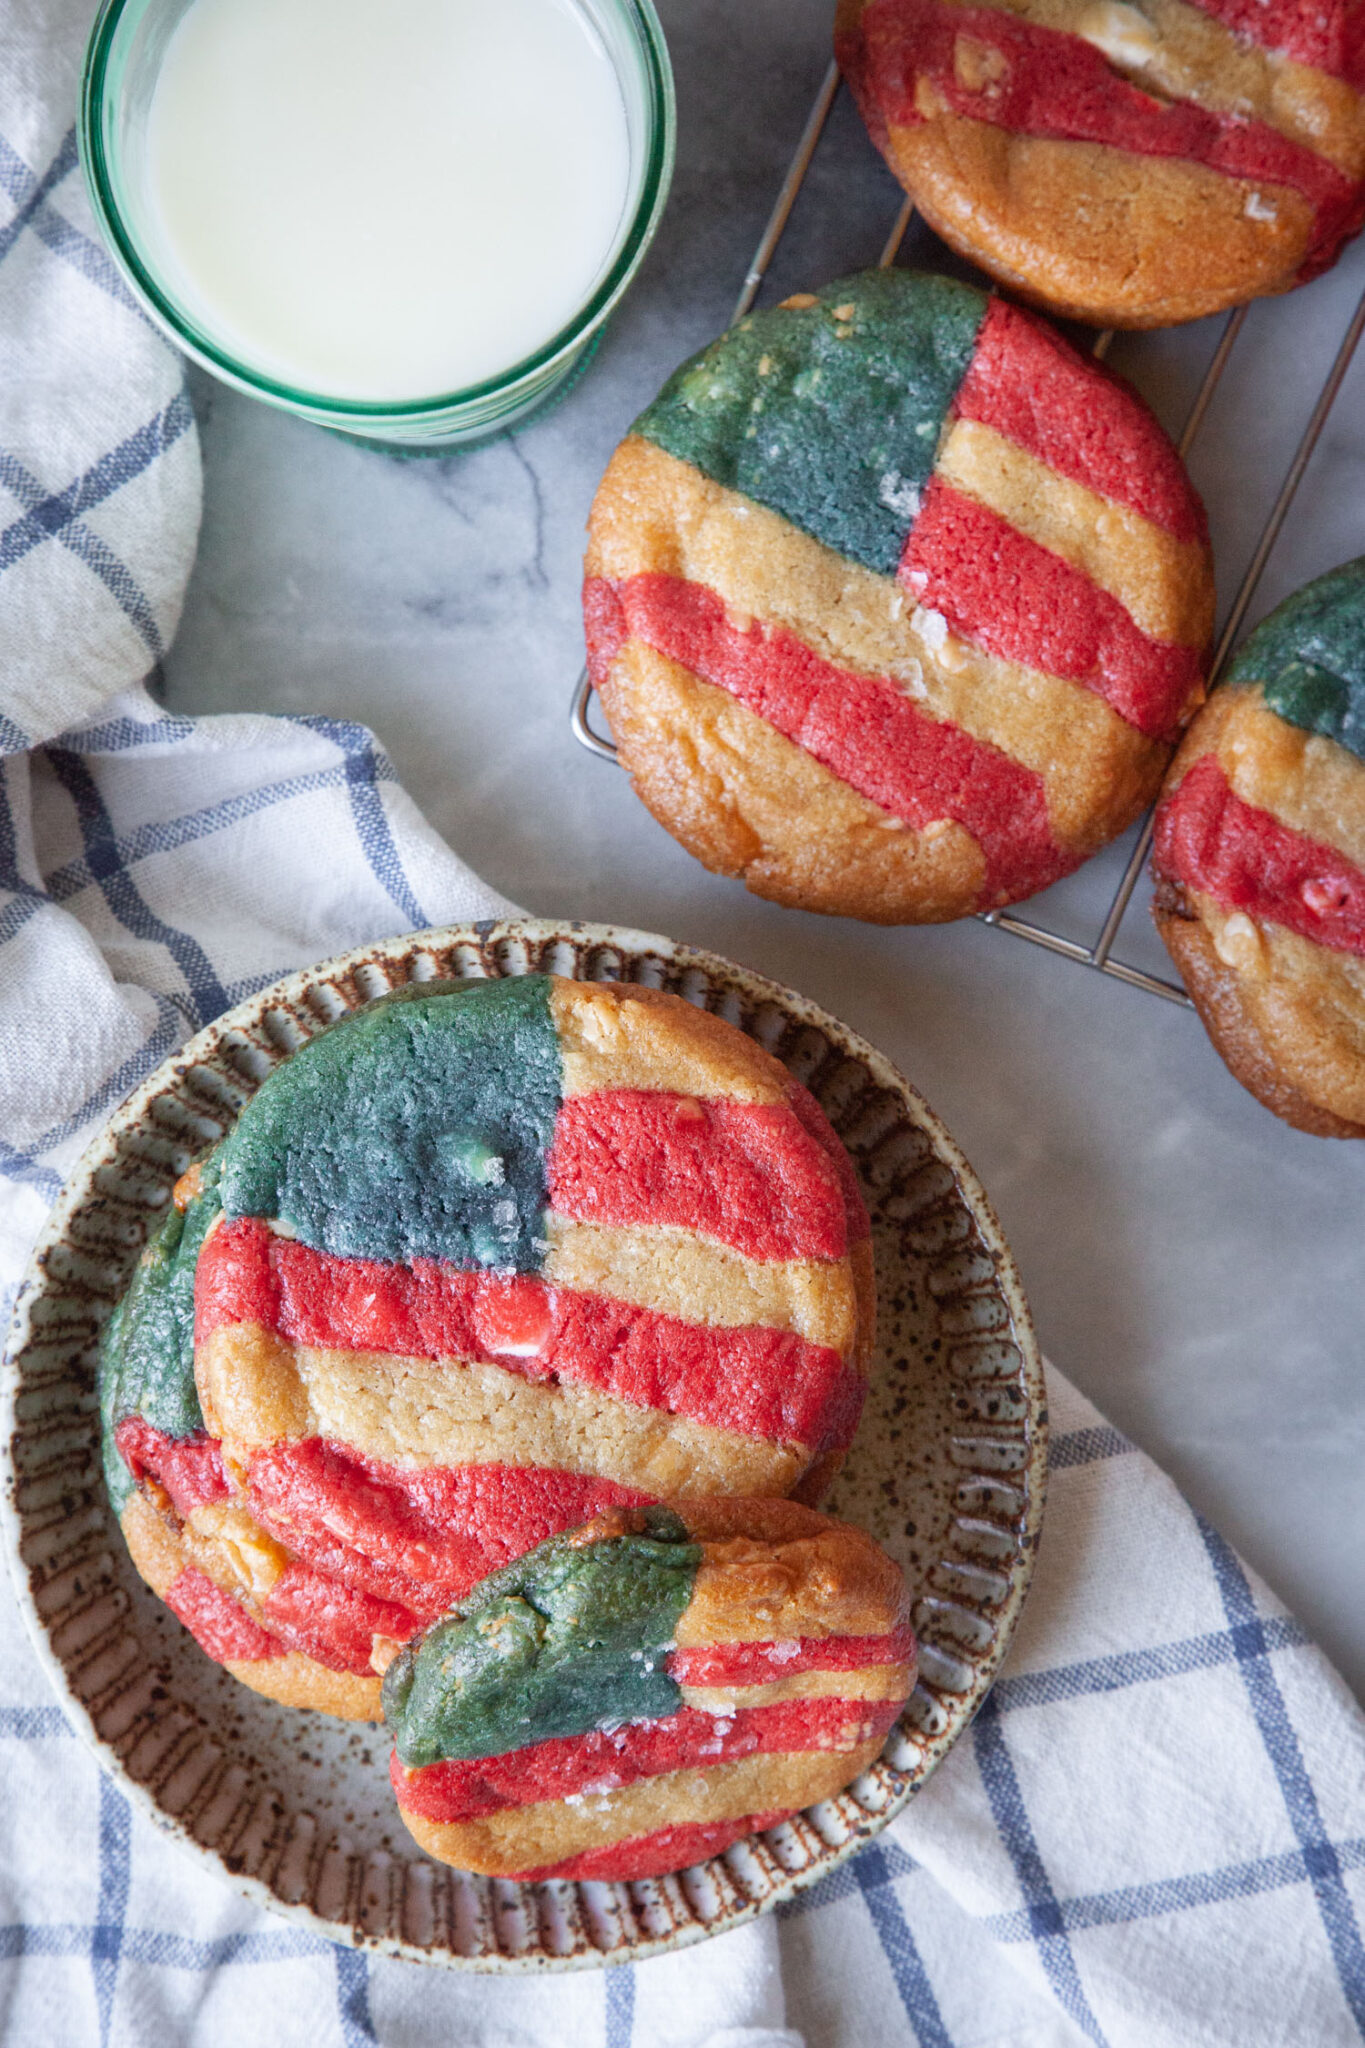 A stack of red, white, and blue American flag-inspired cookies on a plate with a glass of milk and more cookies on a wire cooling rack next to the plate.